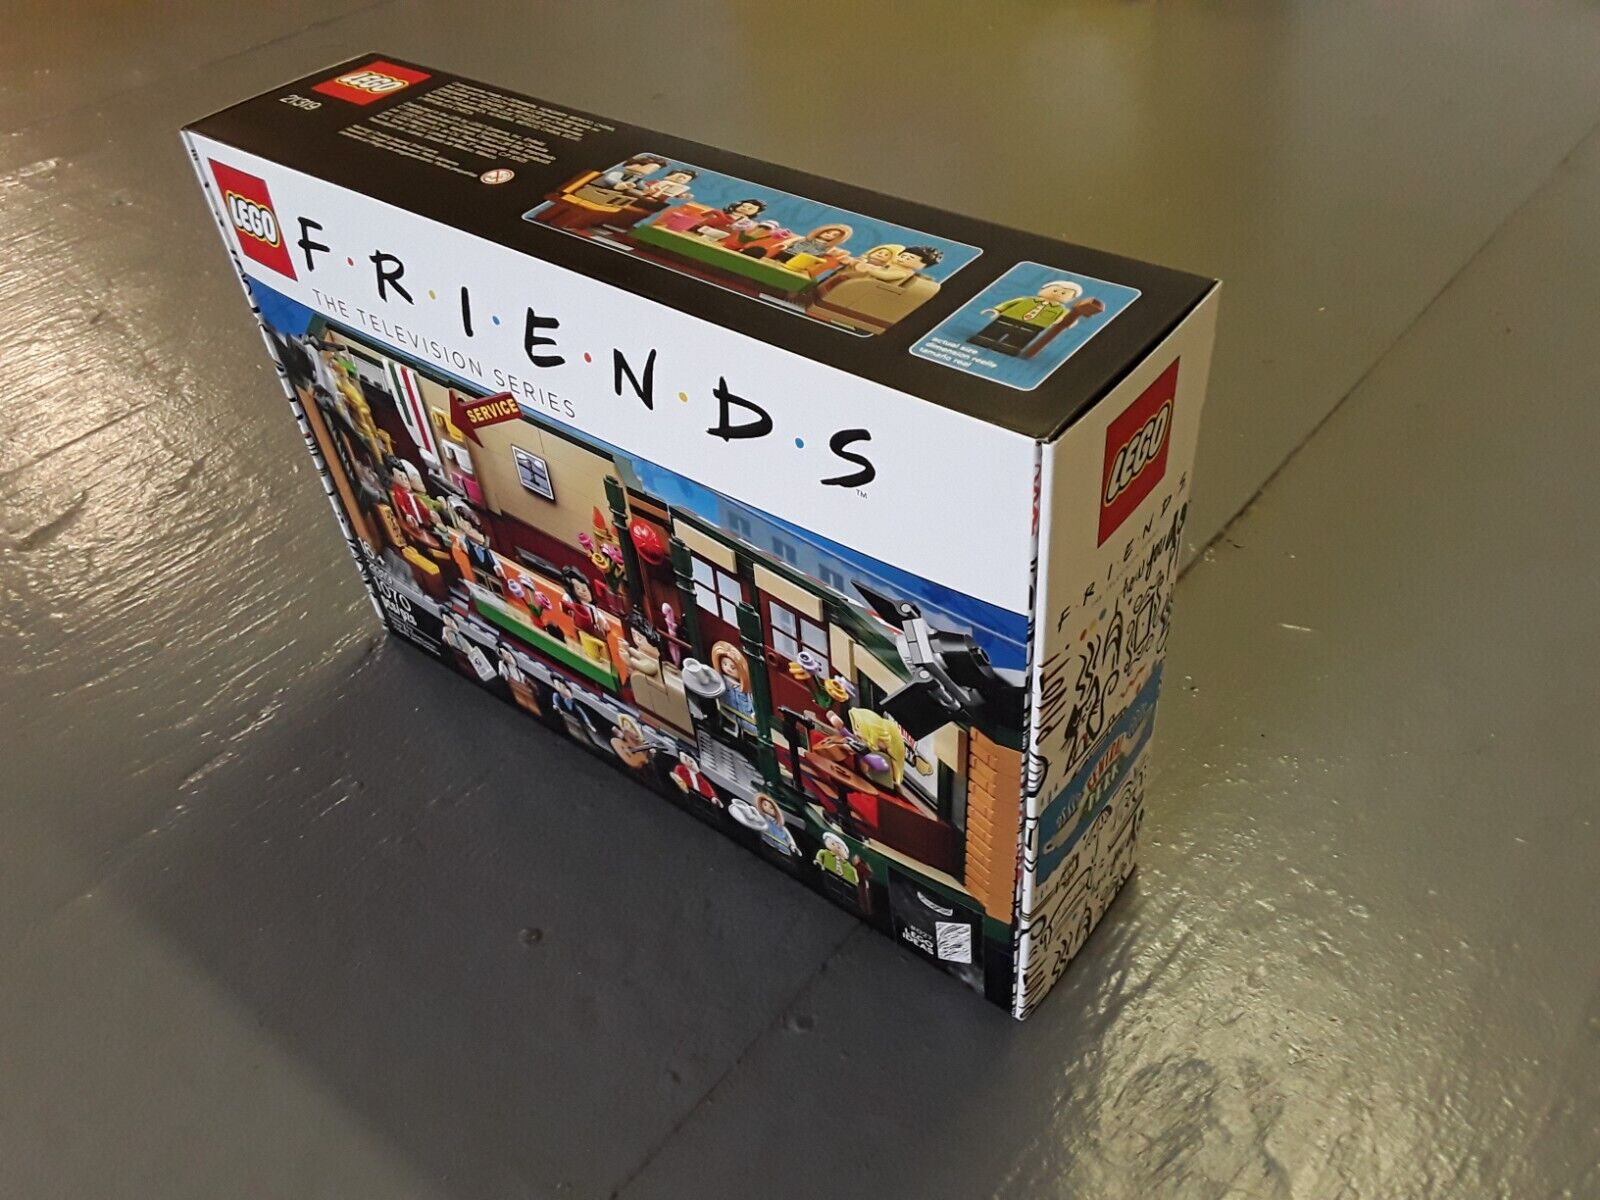 LEGO Releases 7 Sets To Celebrate New 'Friends' Characters